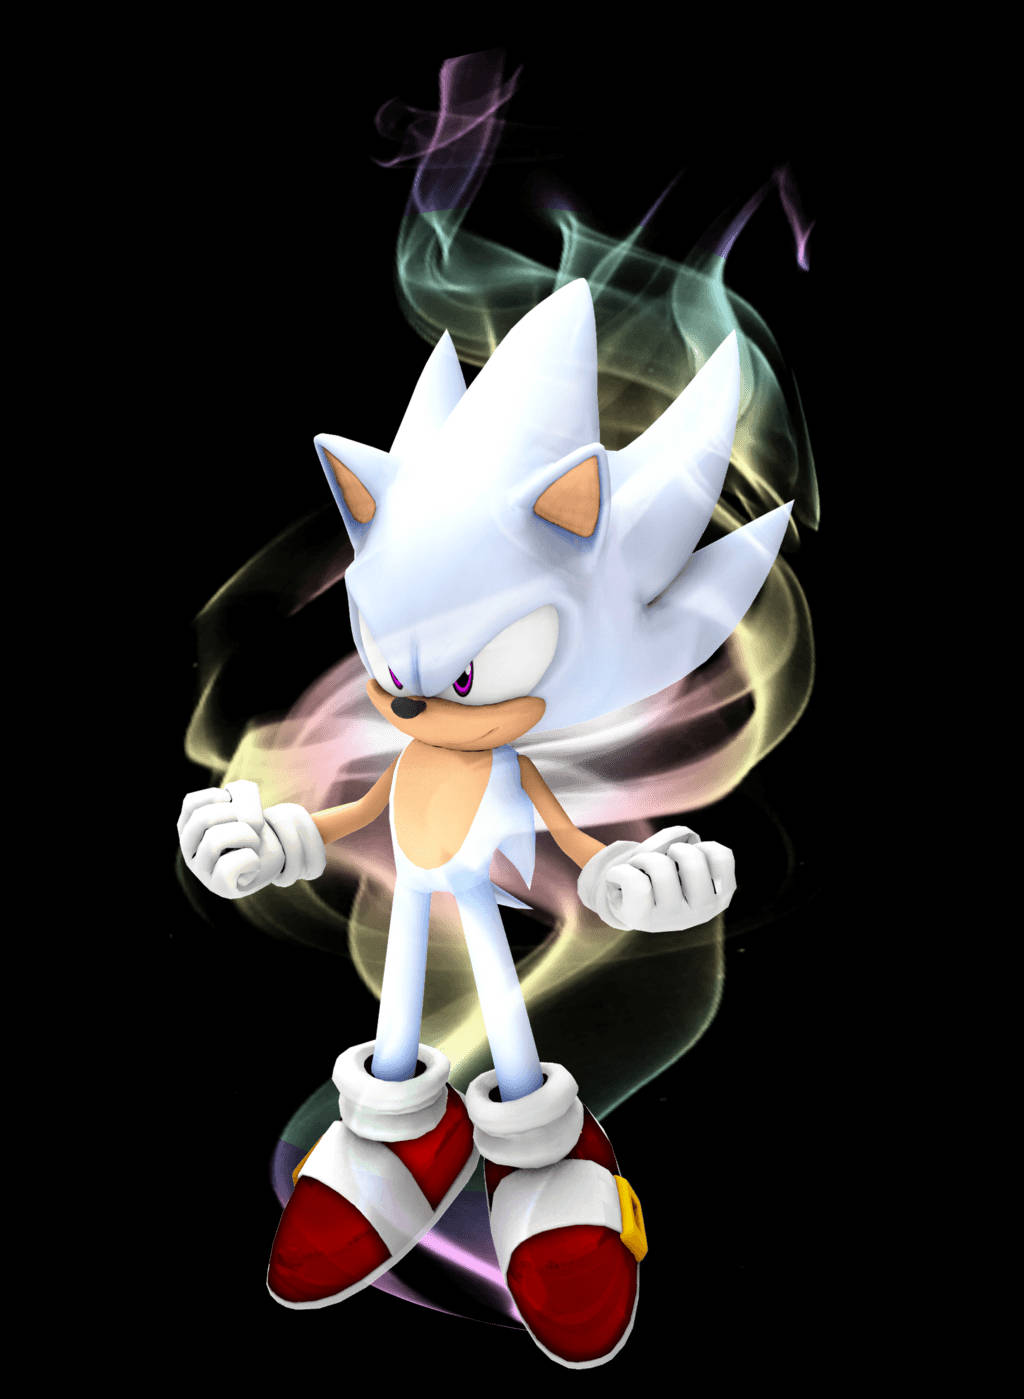 Caption: Hyper Sonic - Unleashing Speed And Power